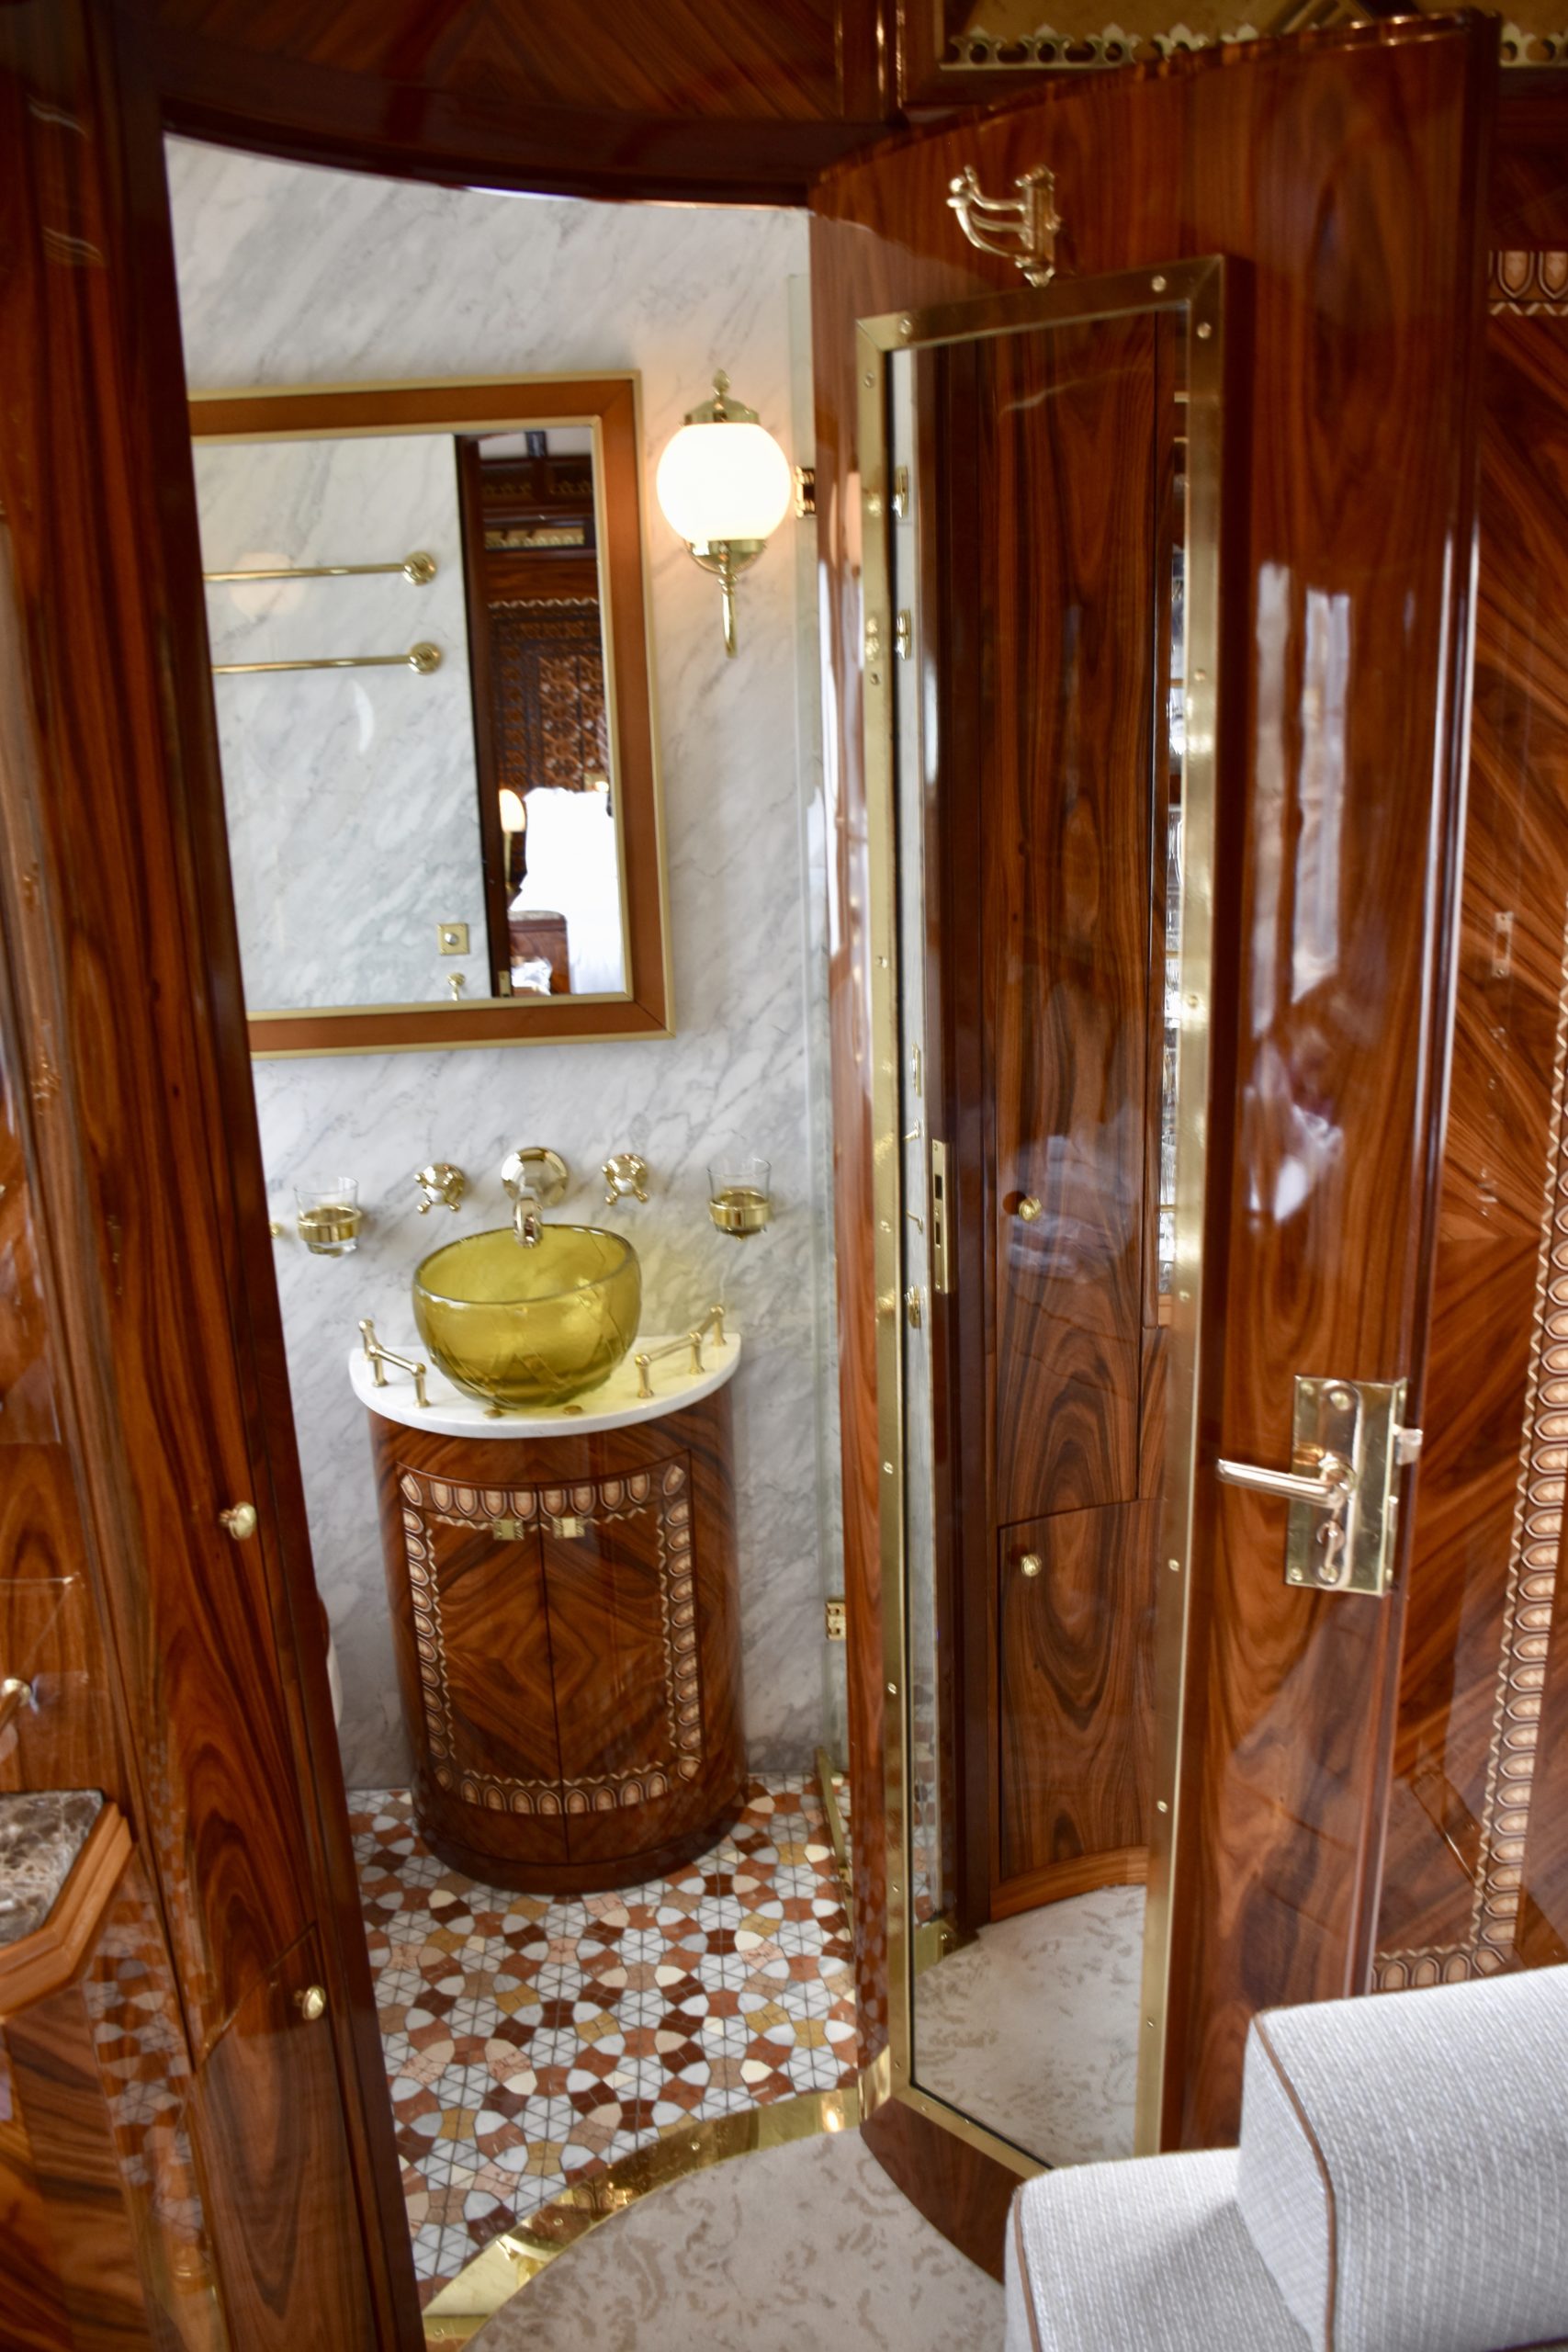 The Orient Express Bathroom